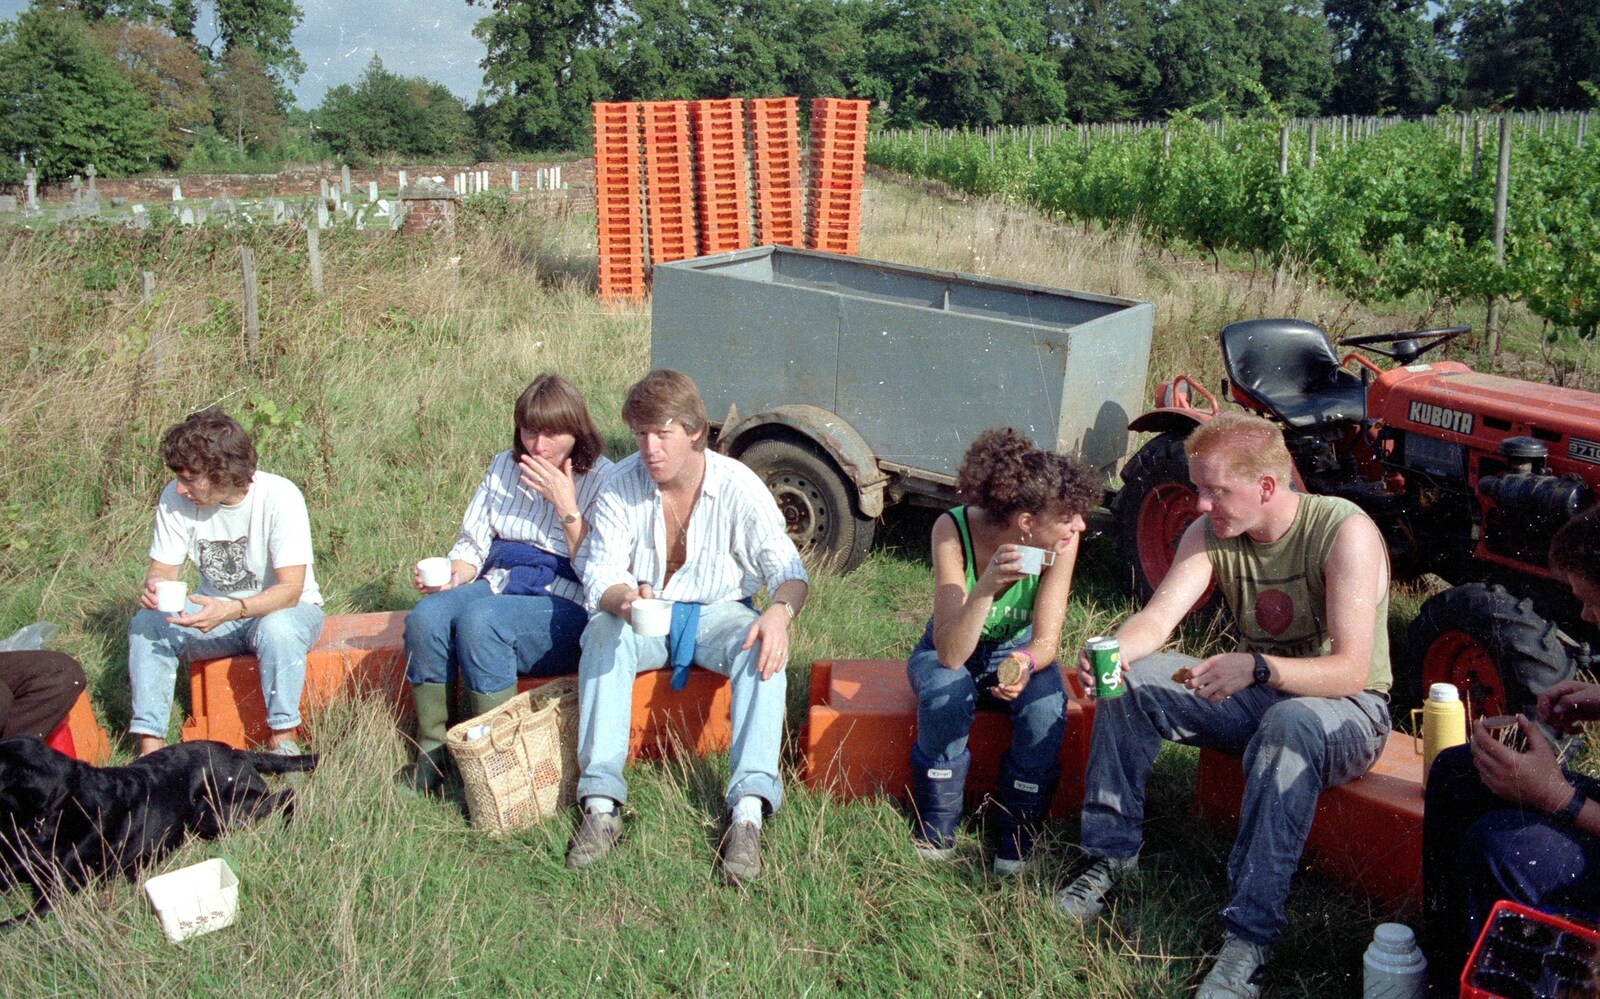 More tea break from Harrow Vineyard Harvest and Wootton Winery, Dorset and Somerset - 5th September 1989